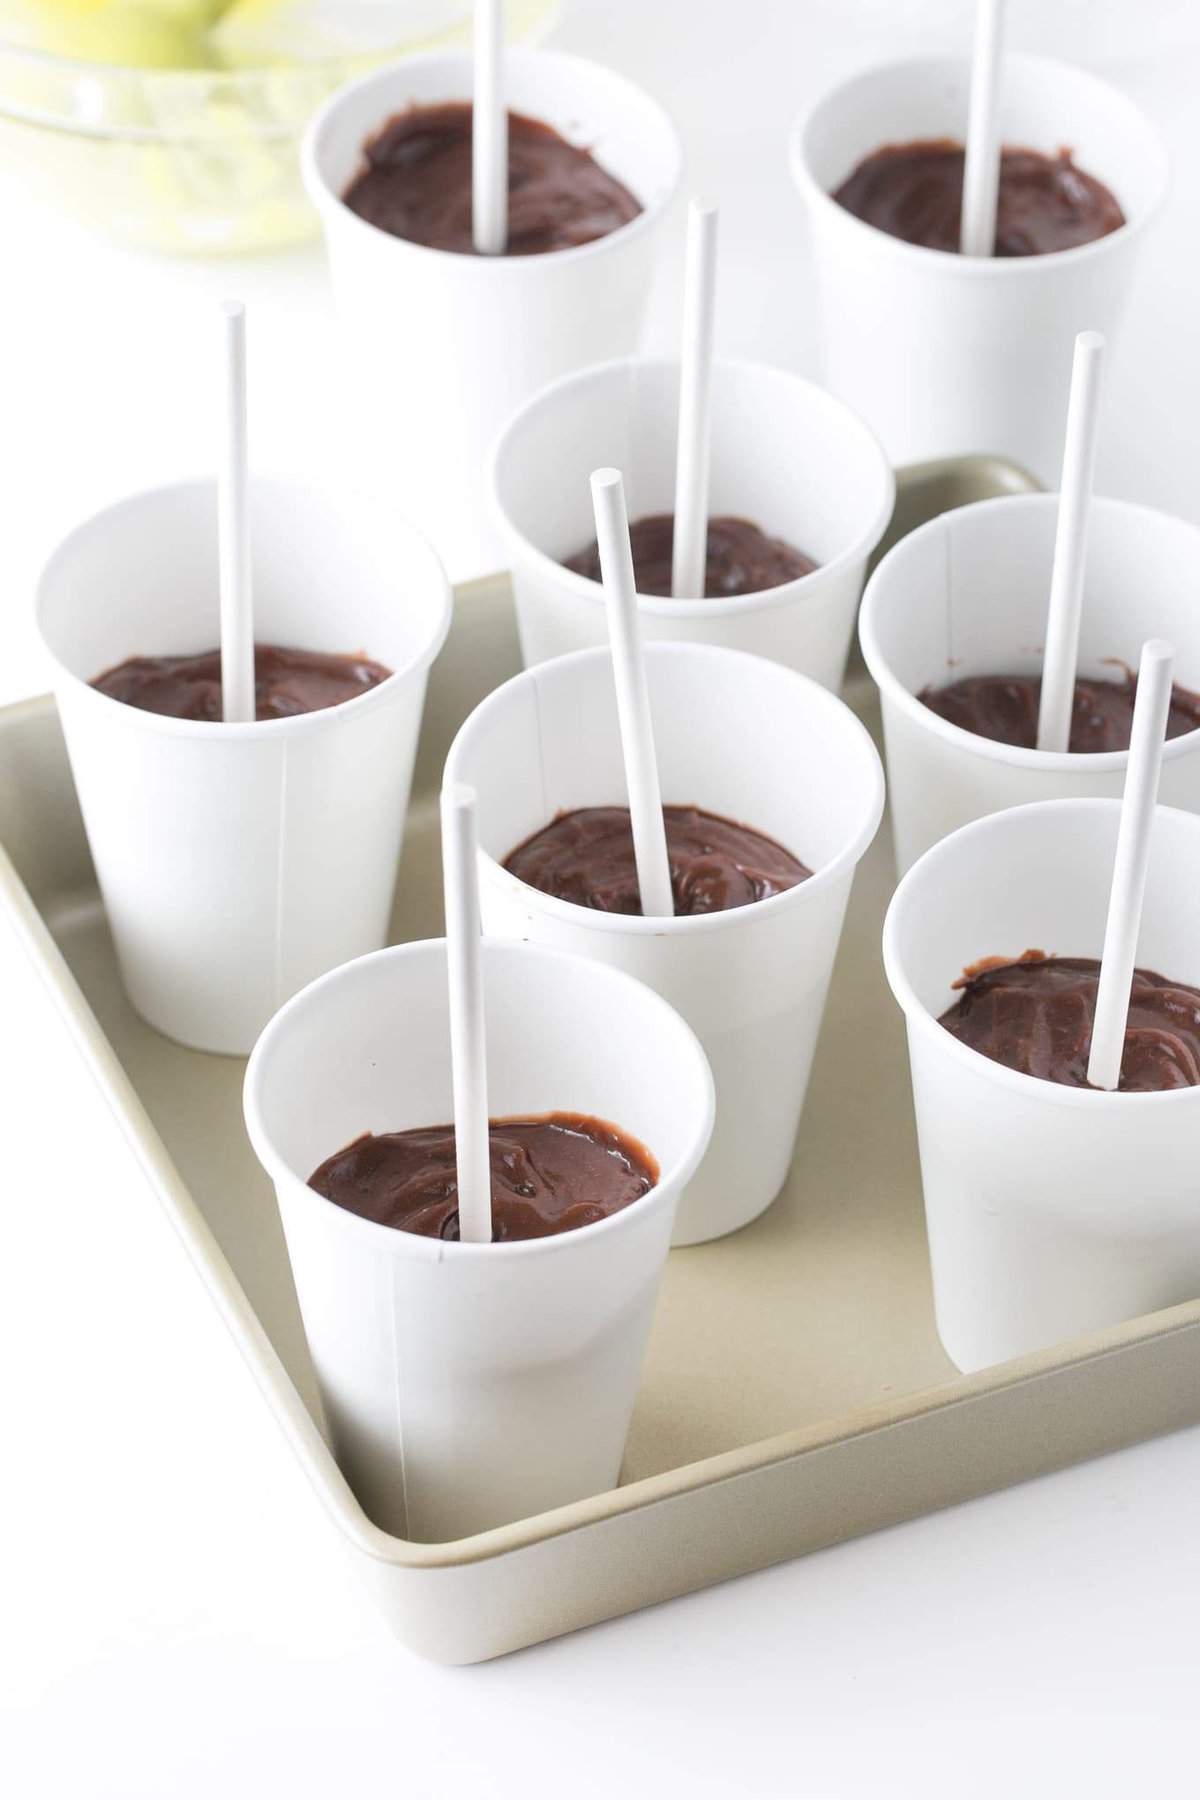 Paper cups filled with chocolate pudding, ready to go into freezer.